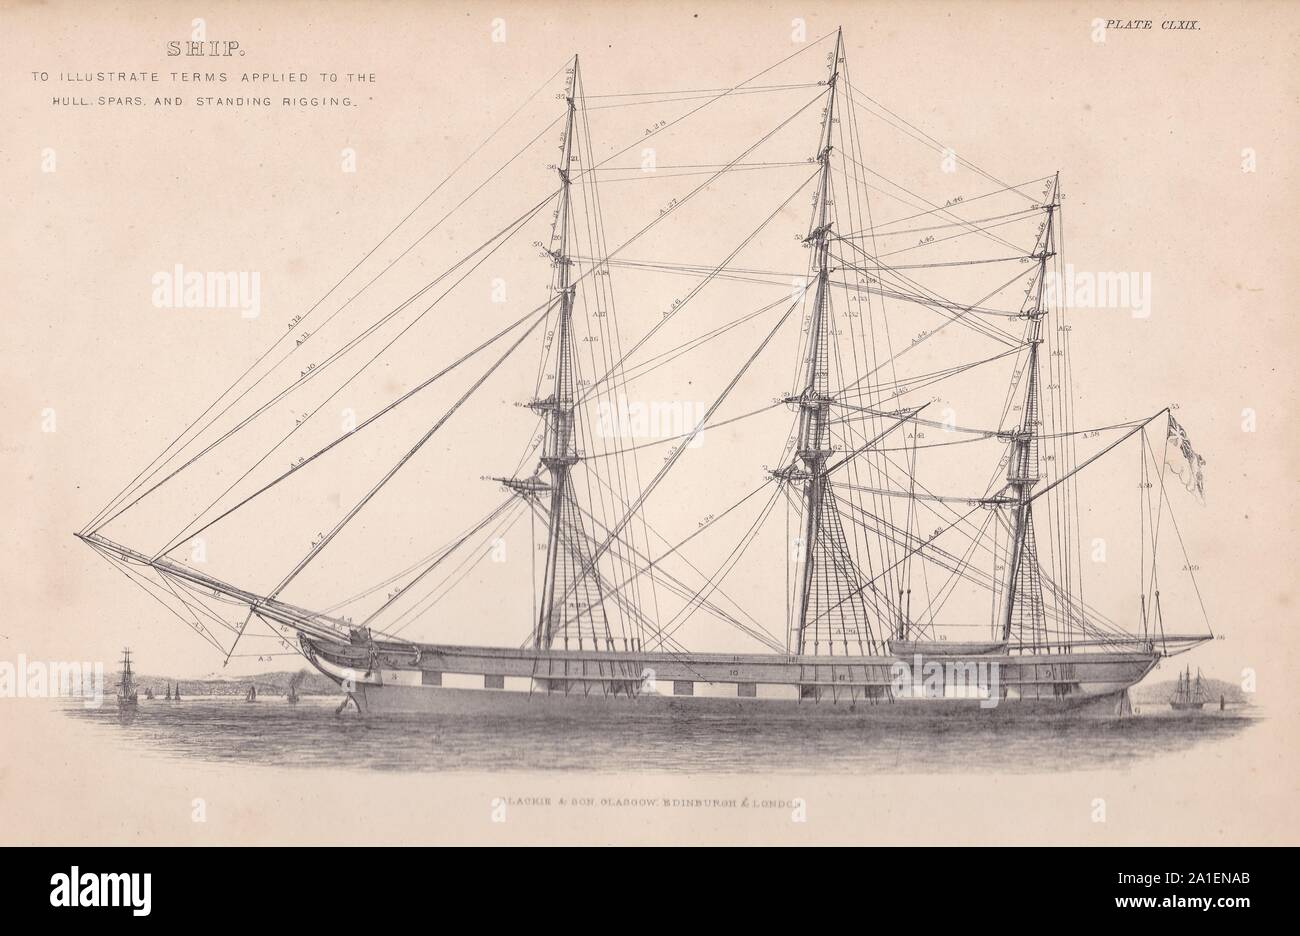 Book plate of Ship - To illustration terms applied to the hull, spars and standing rigging 1800s. Stock Photo